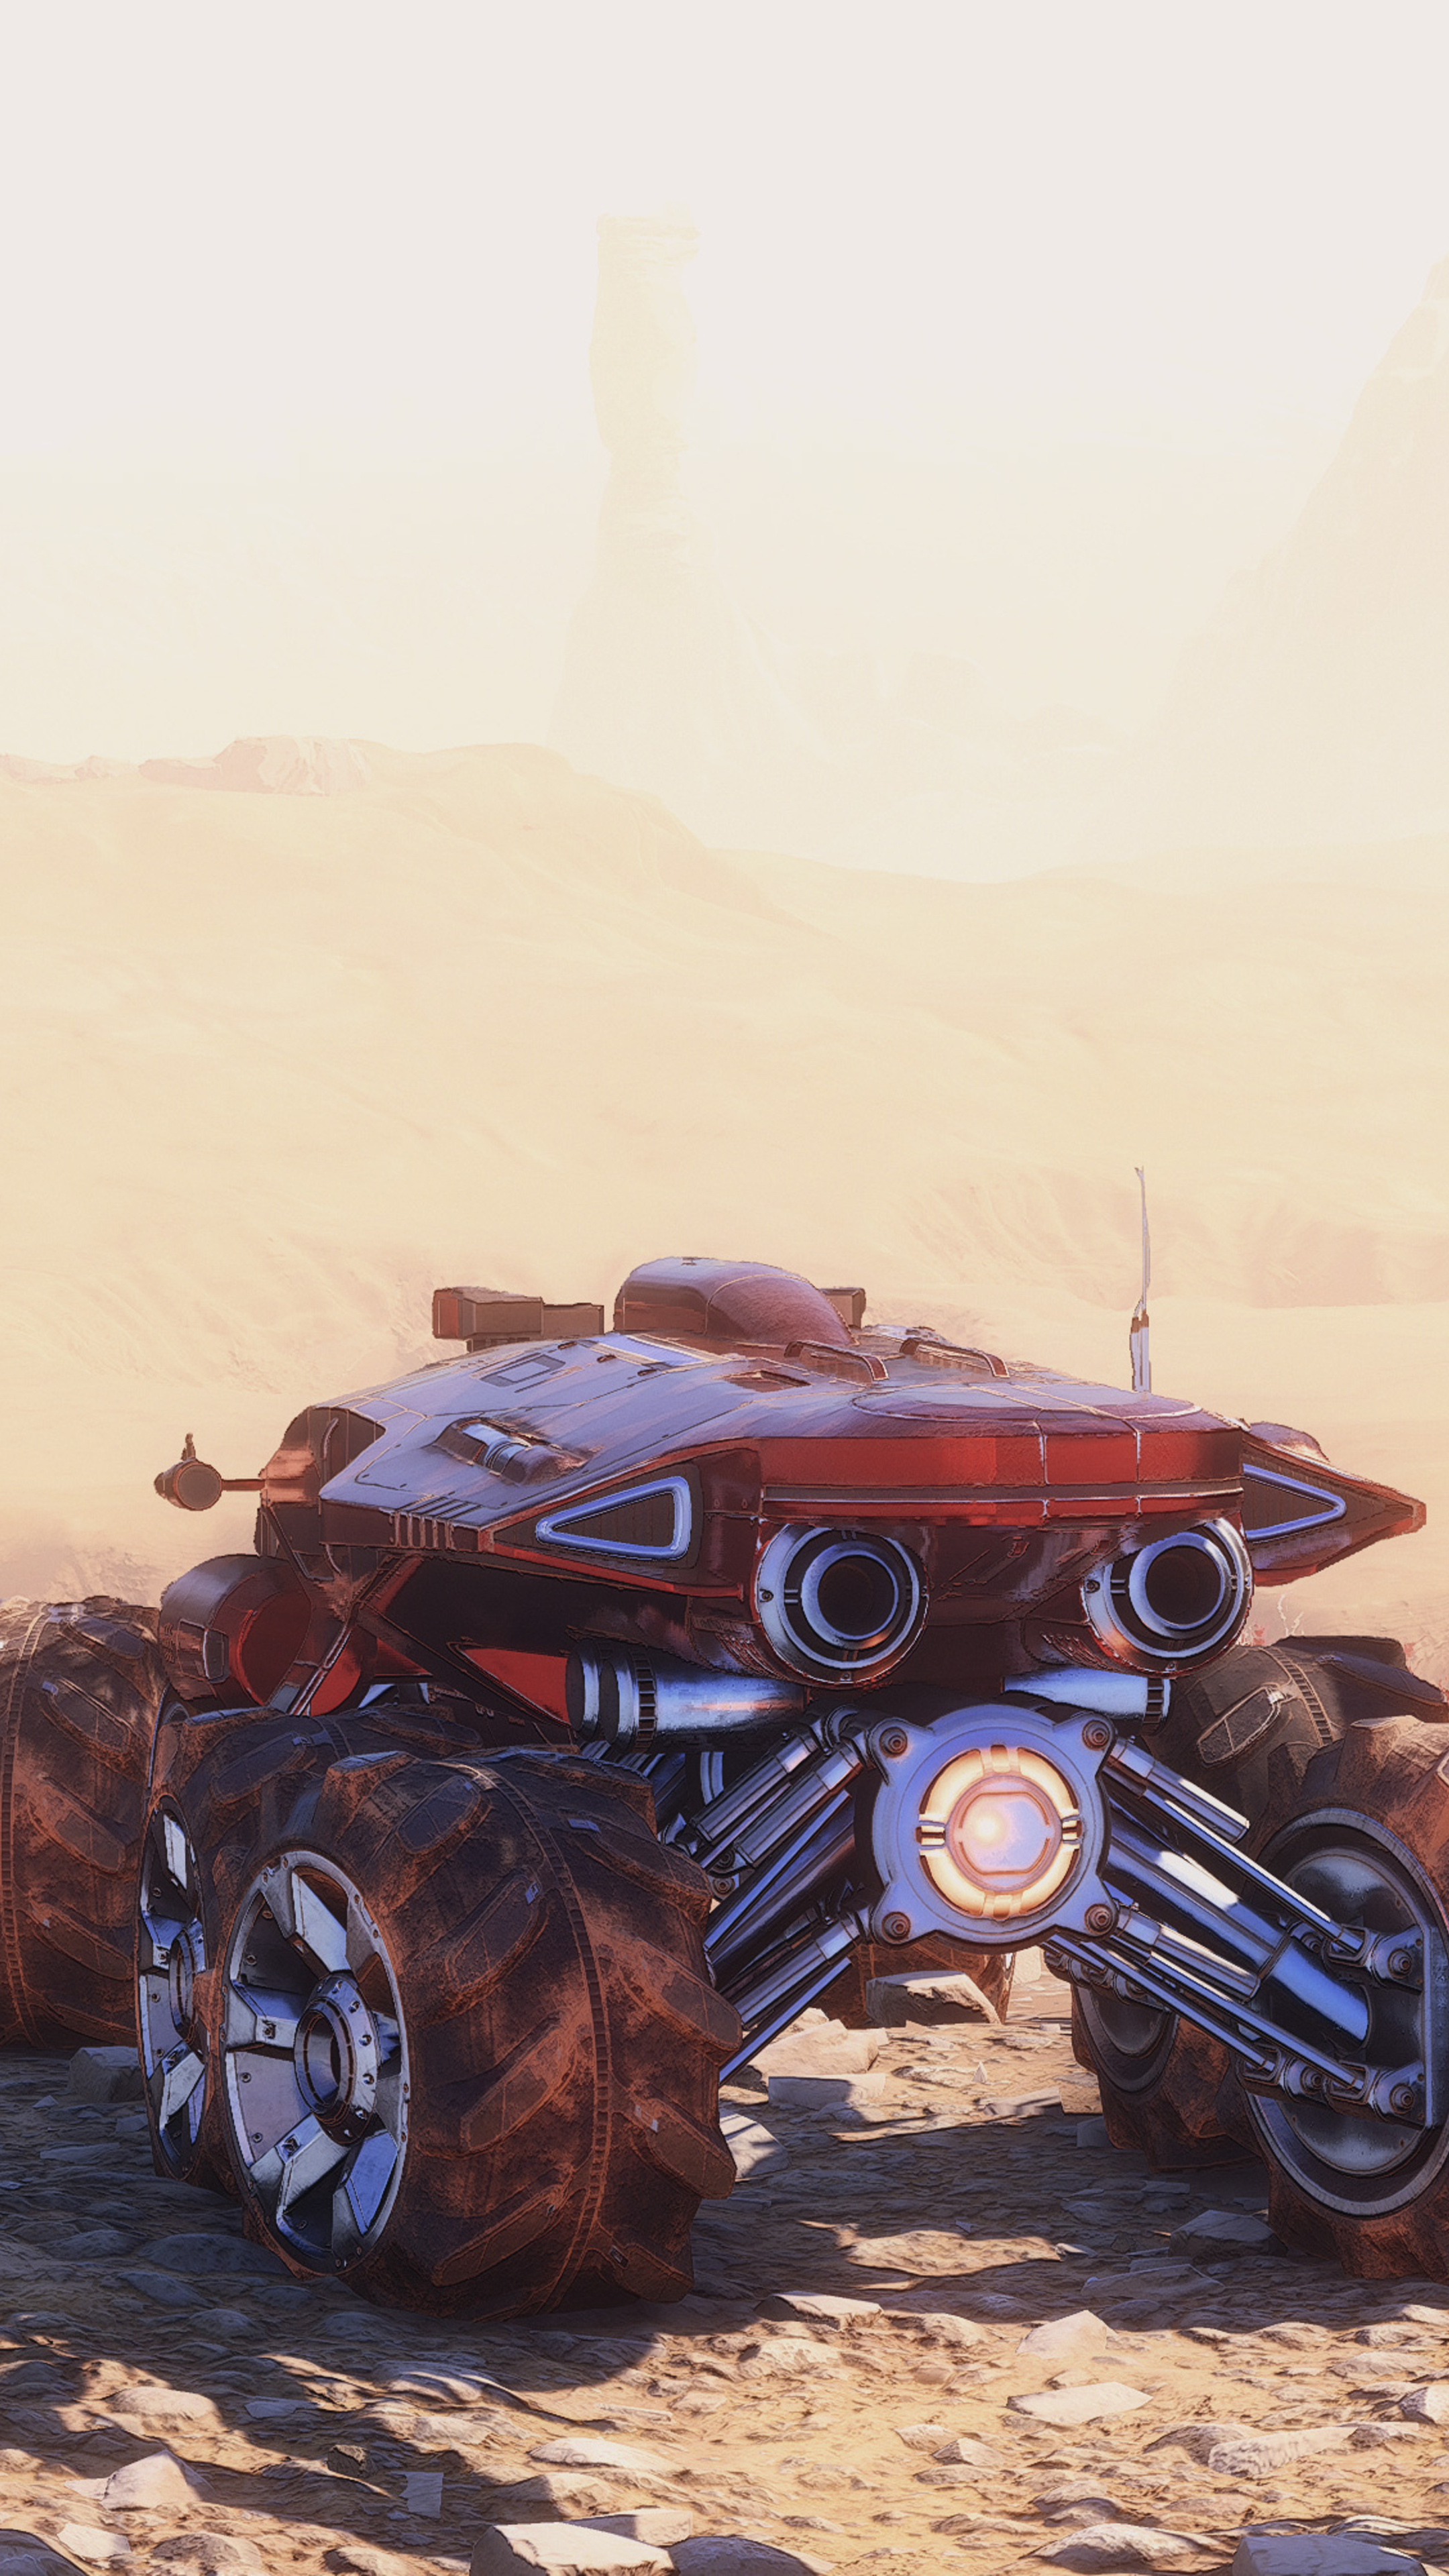 Mass Effect: Andromeda vehicles, Sony Xperia X, HD wallpapers, Backgrounds photos, 2160x3840 4K Handy